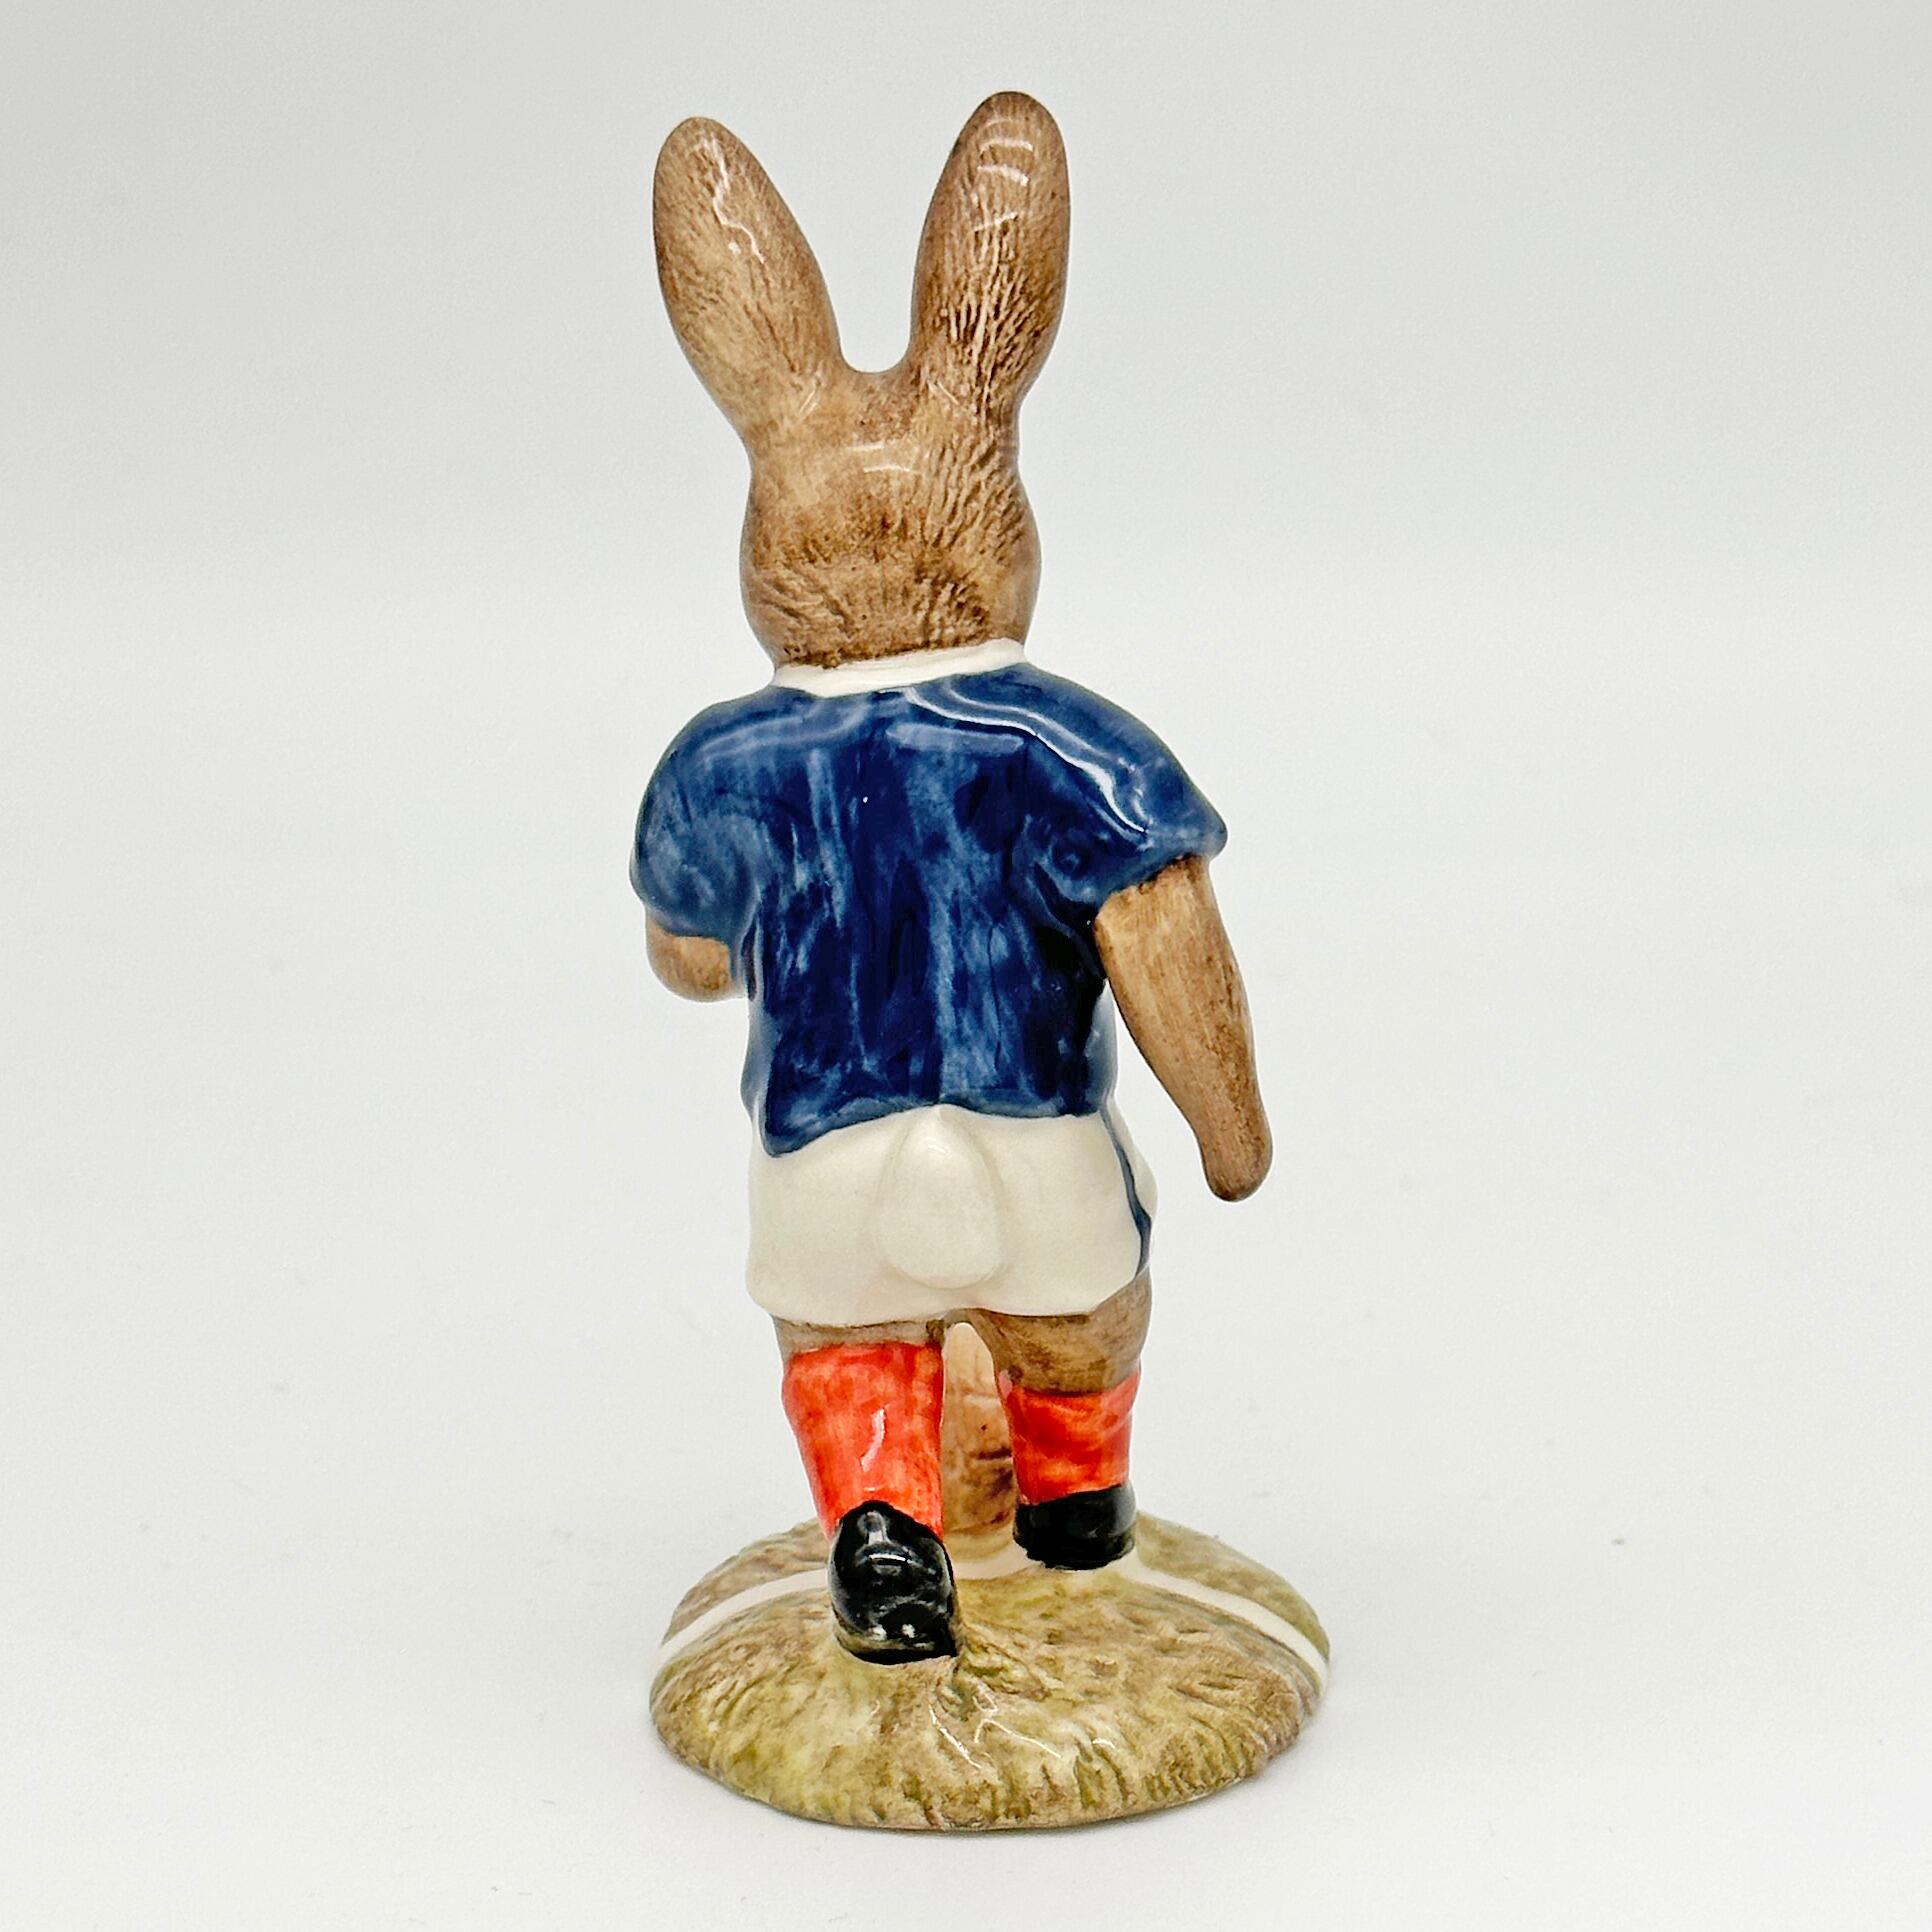 Royal Doulton Bunnykins figure - DB123 Soccer Playerin Blue and White - back